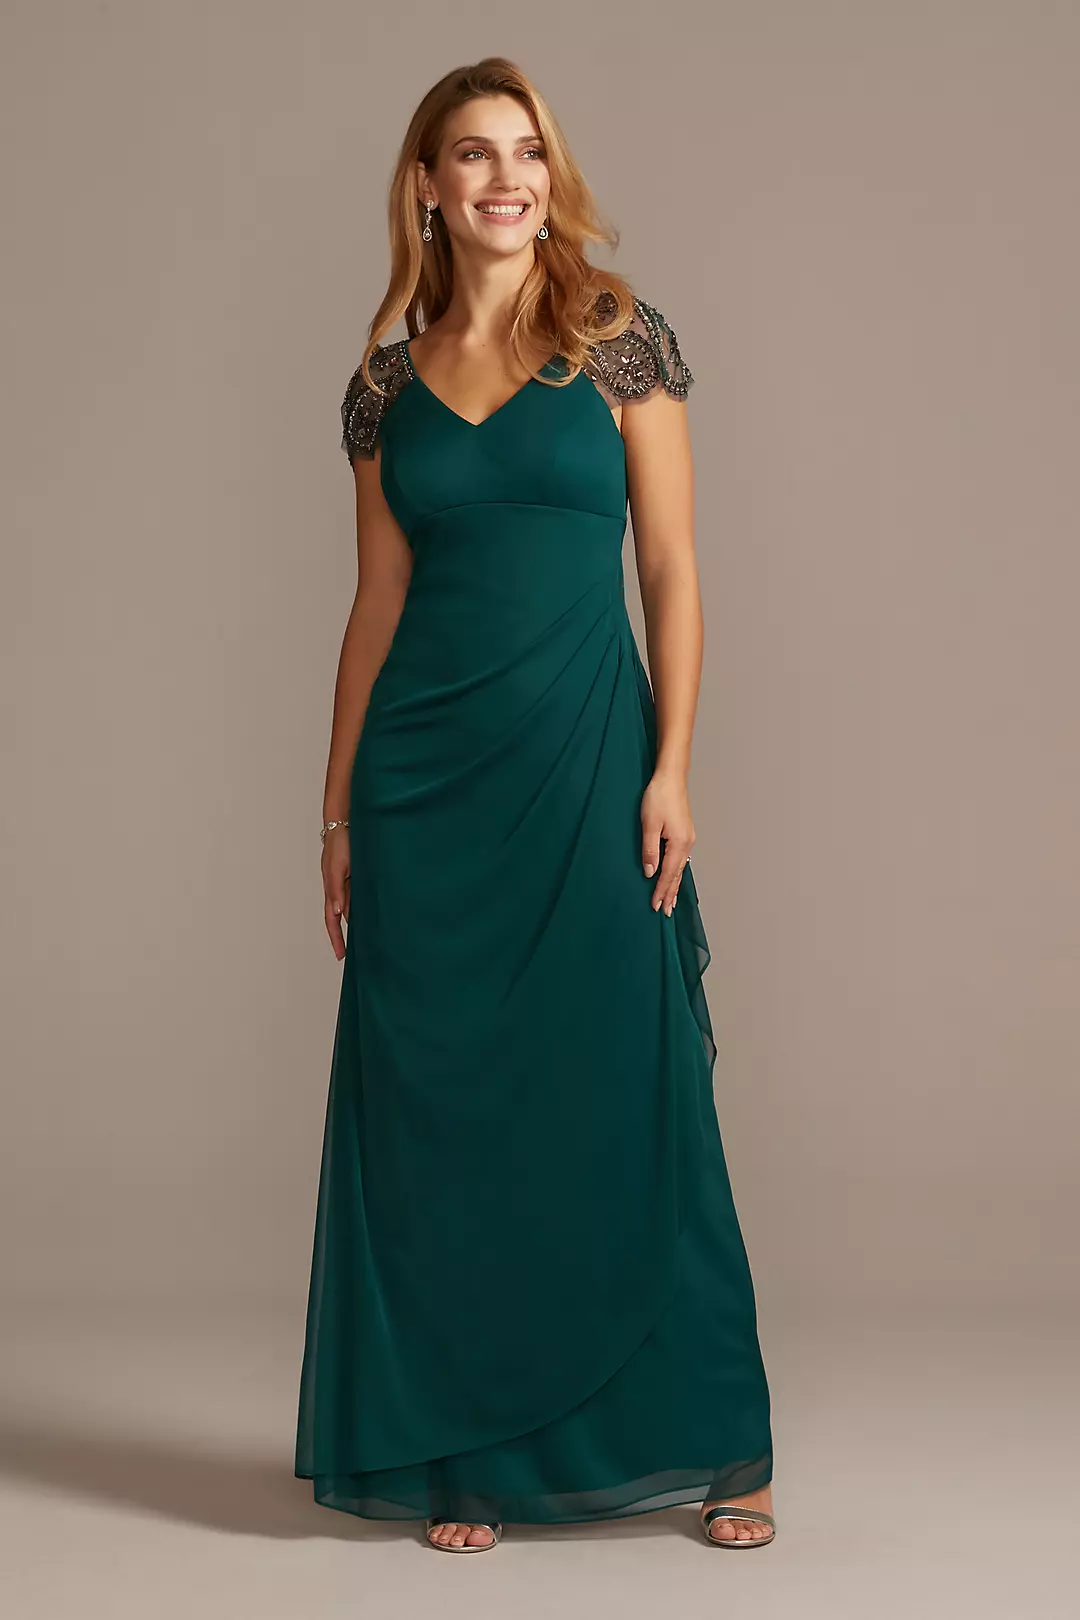 Embellished Chiffon Cap Sleeve Ruched Gown Image